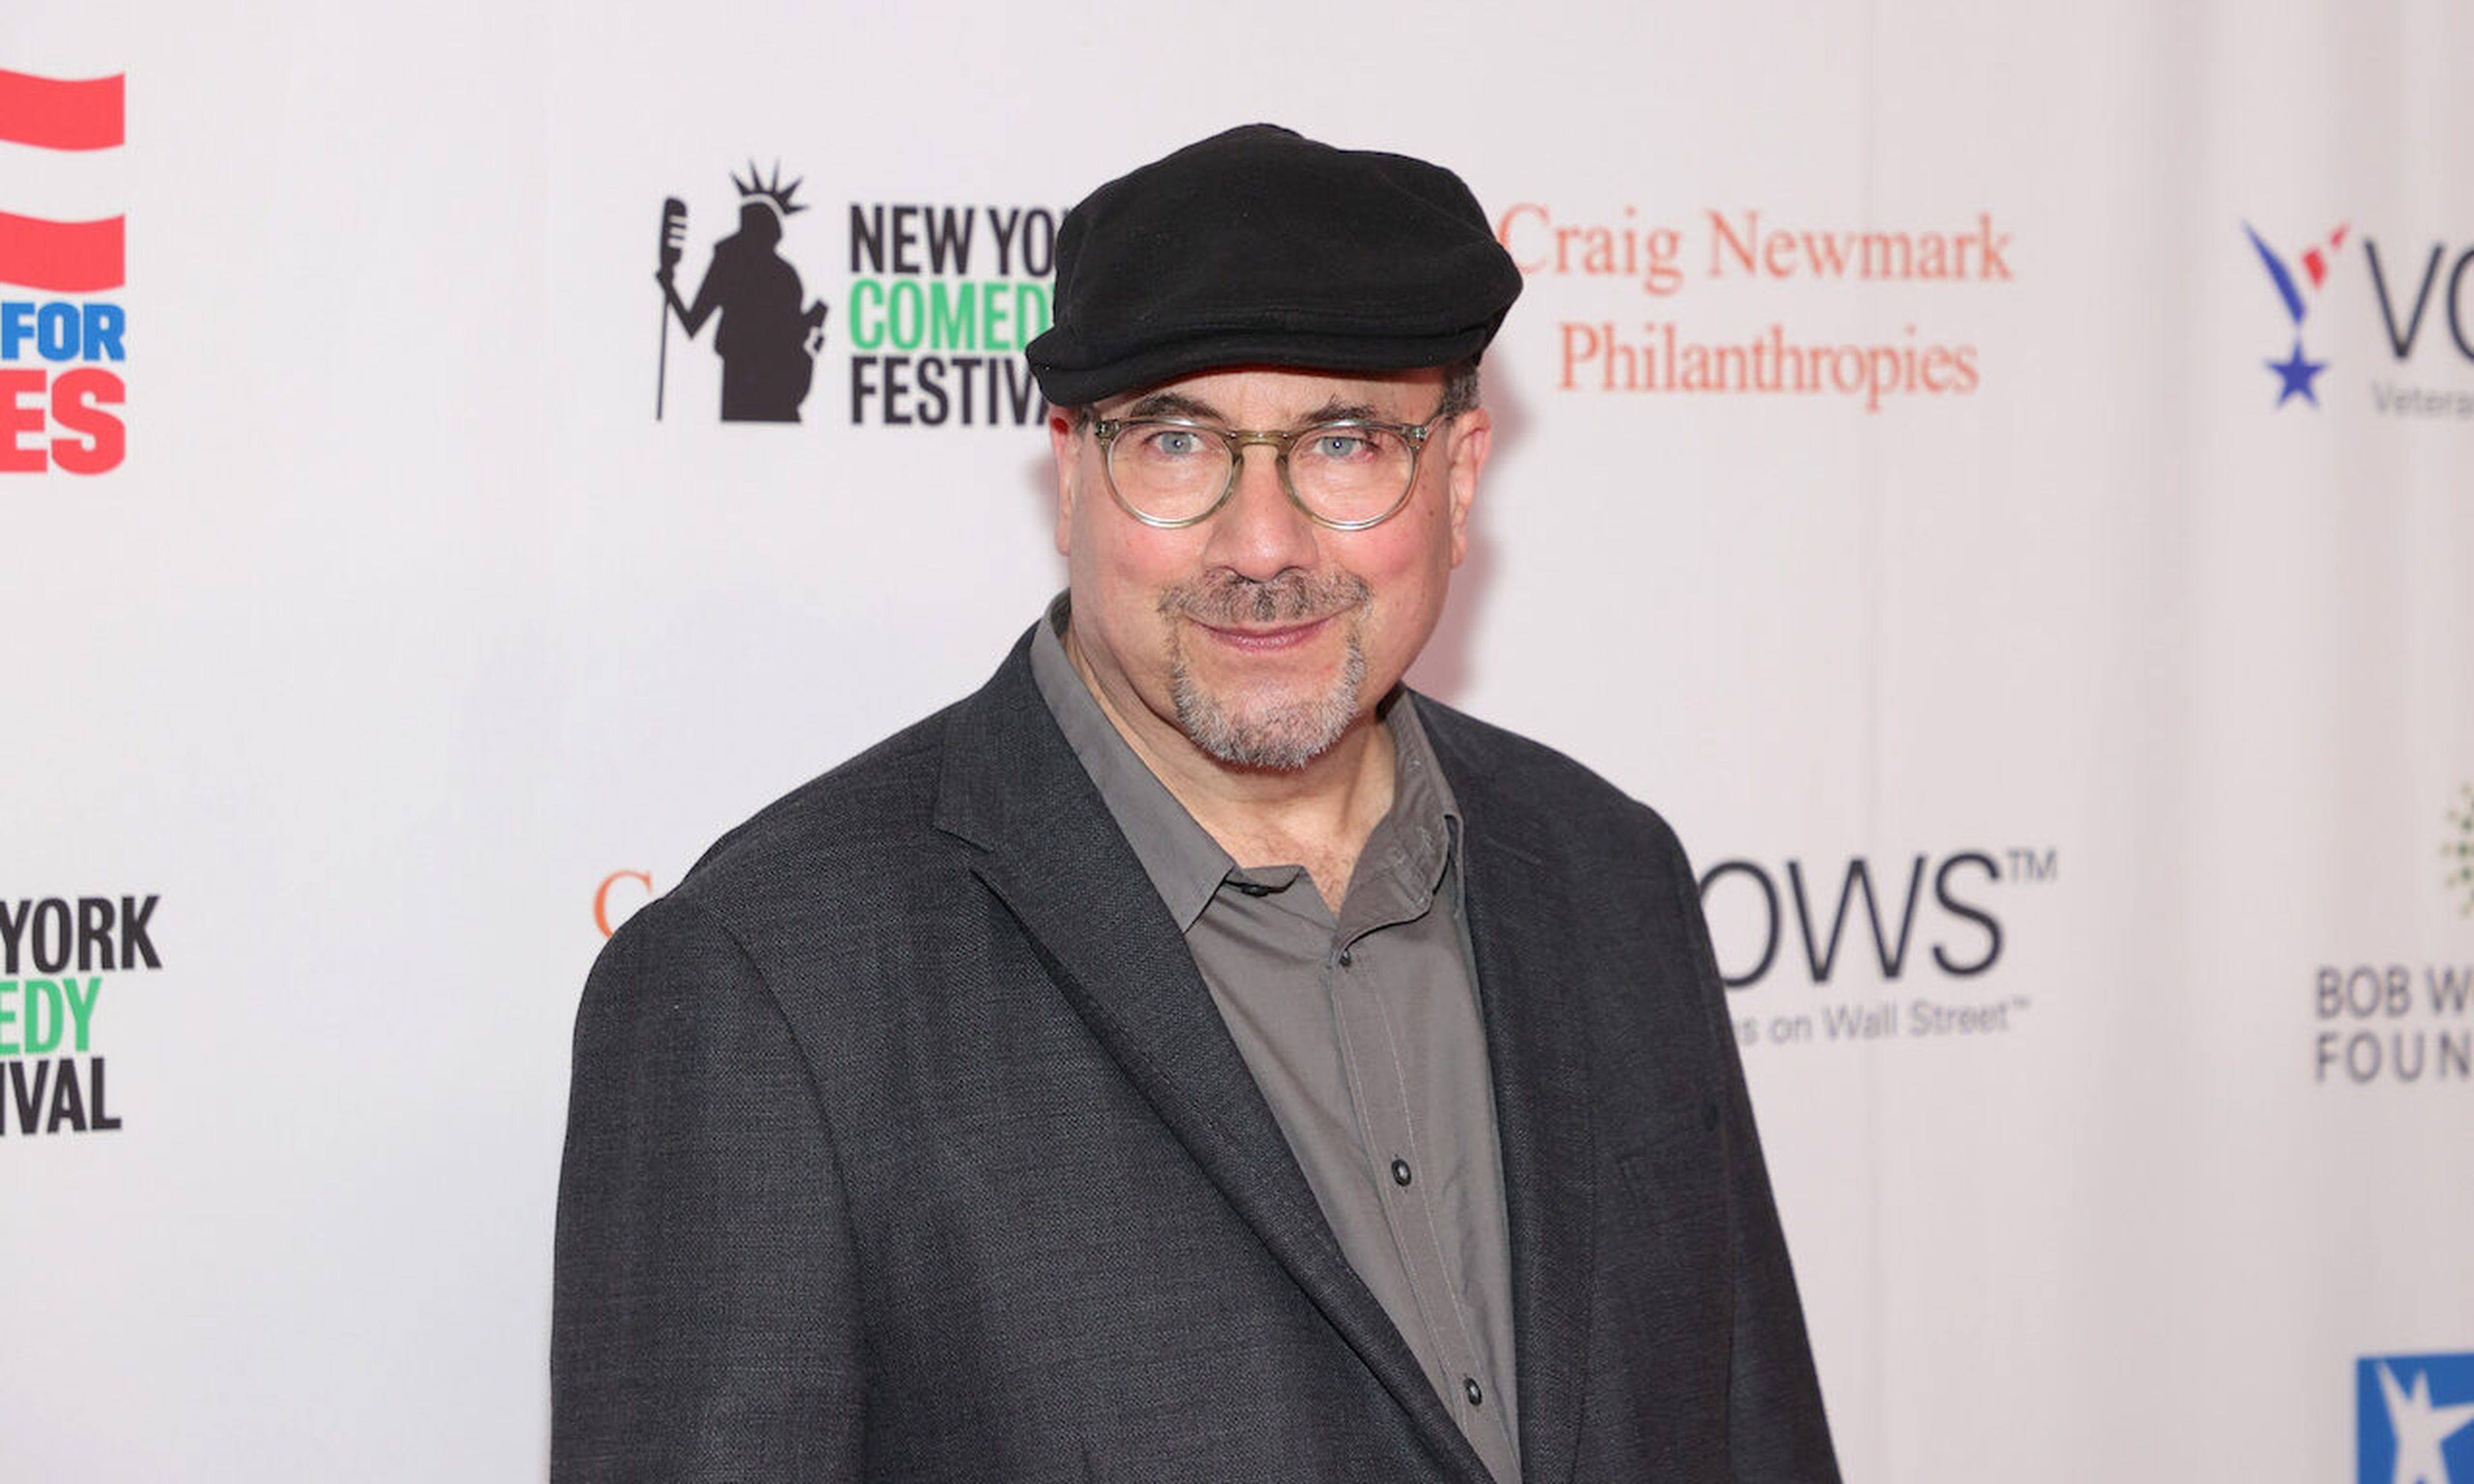 Craig Newmark attends the 15th Annual Stand Up For Heroes at Alice Tully Hall, Lincoln Center on November 08, 2021 in New York City. (Photo by Dia Dipasupil/Getty Images)